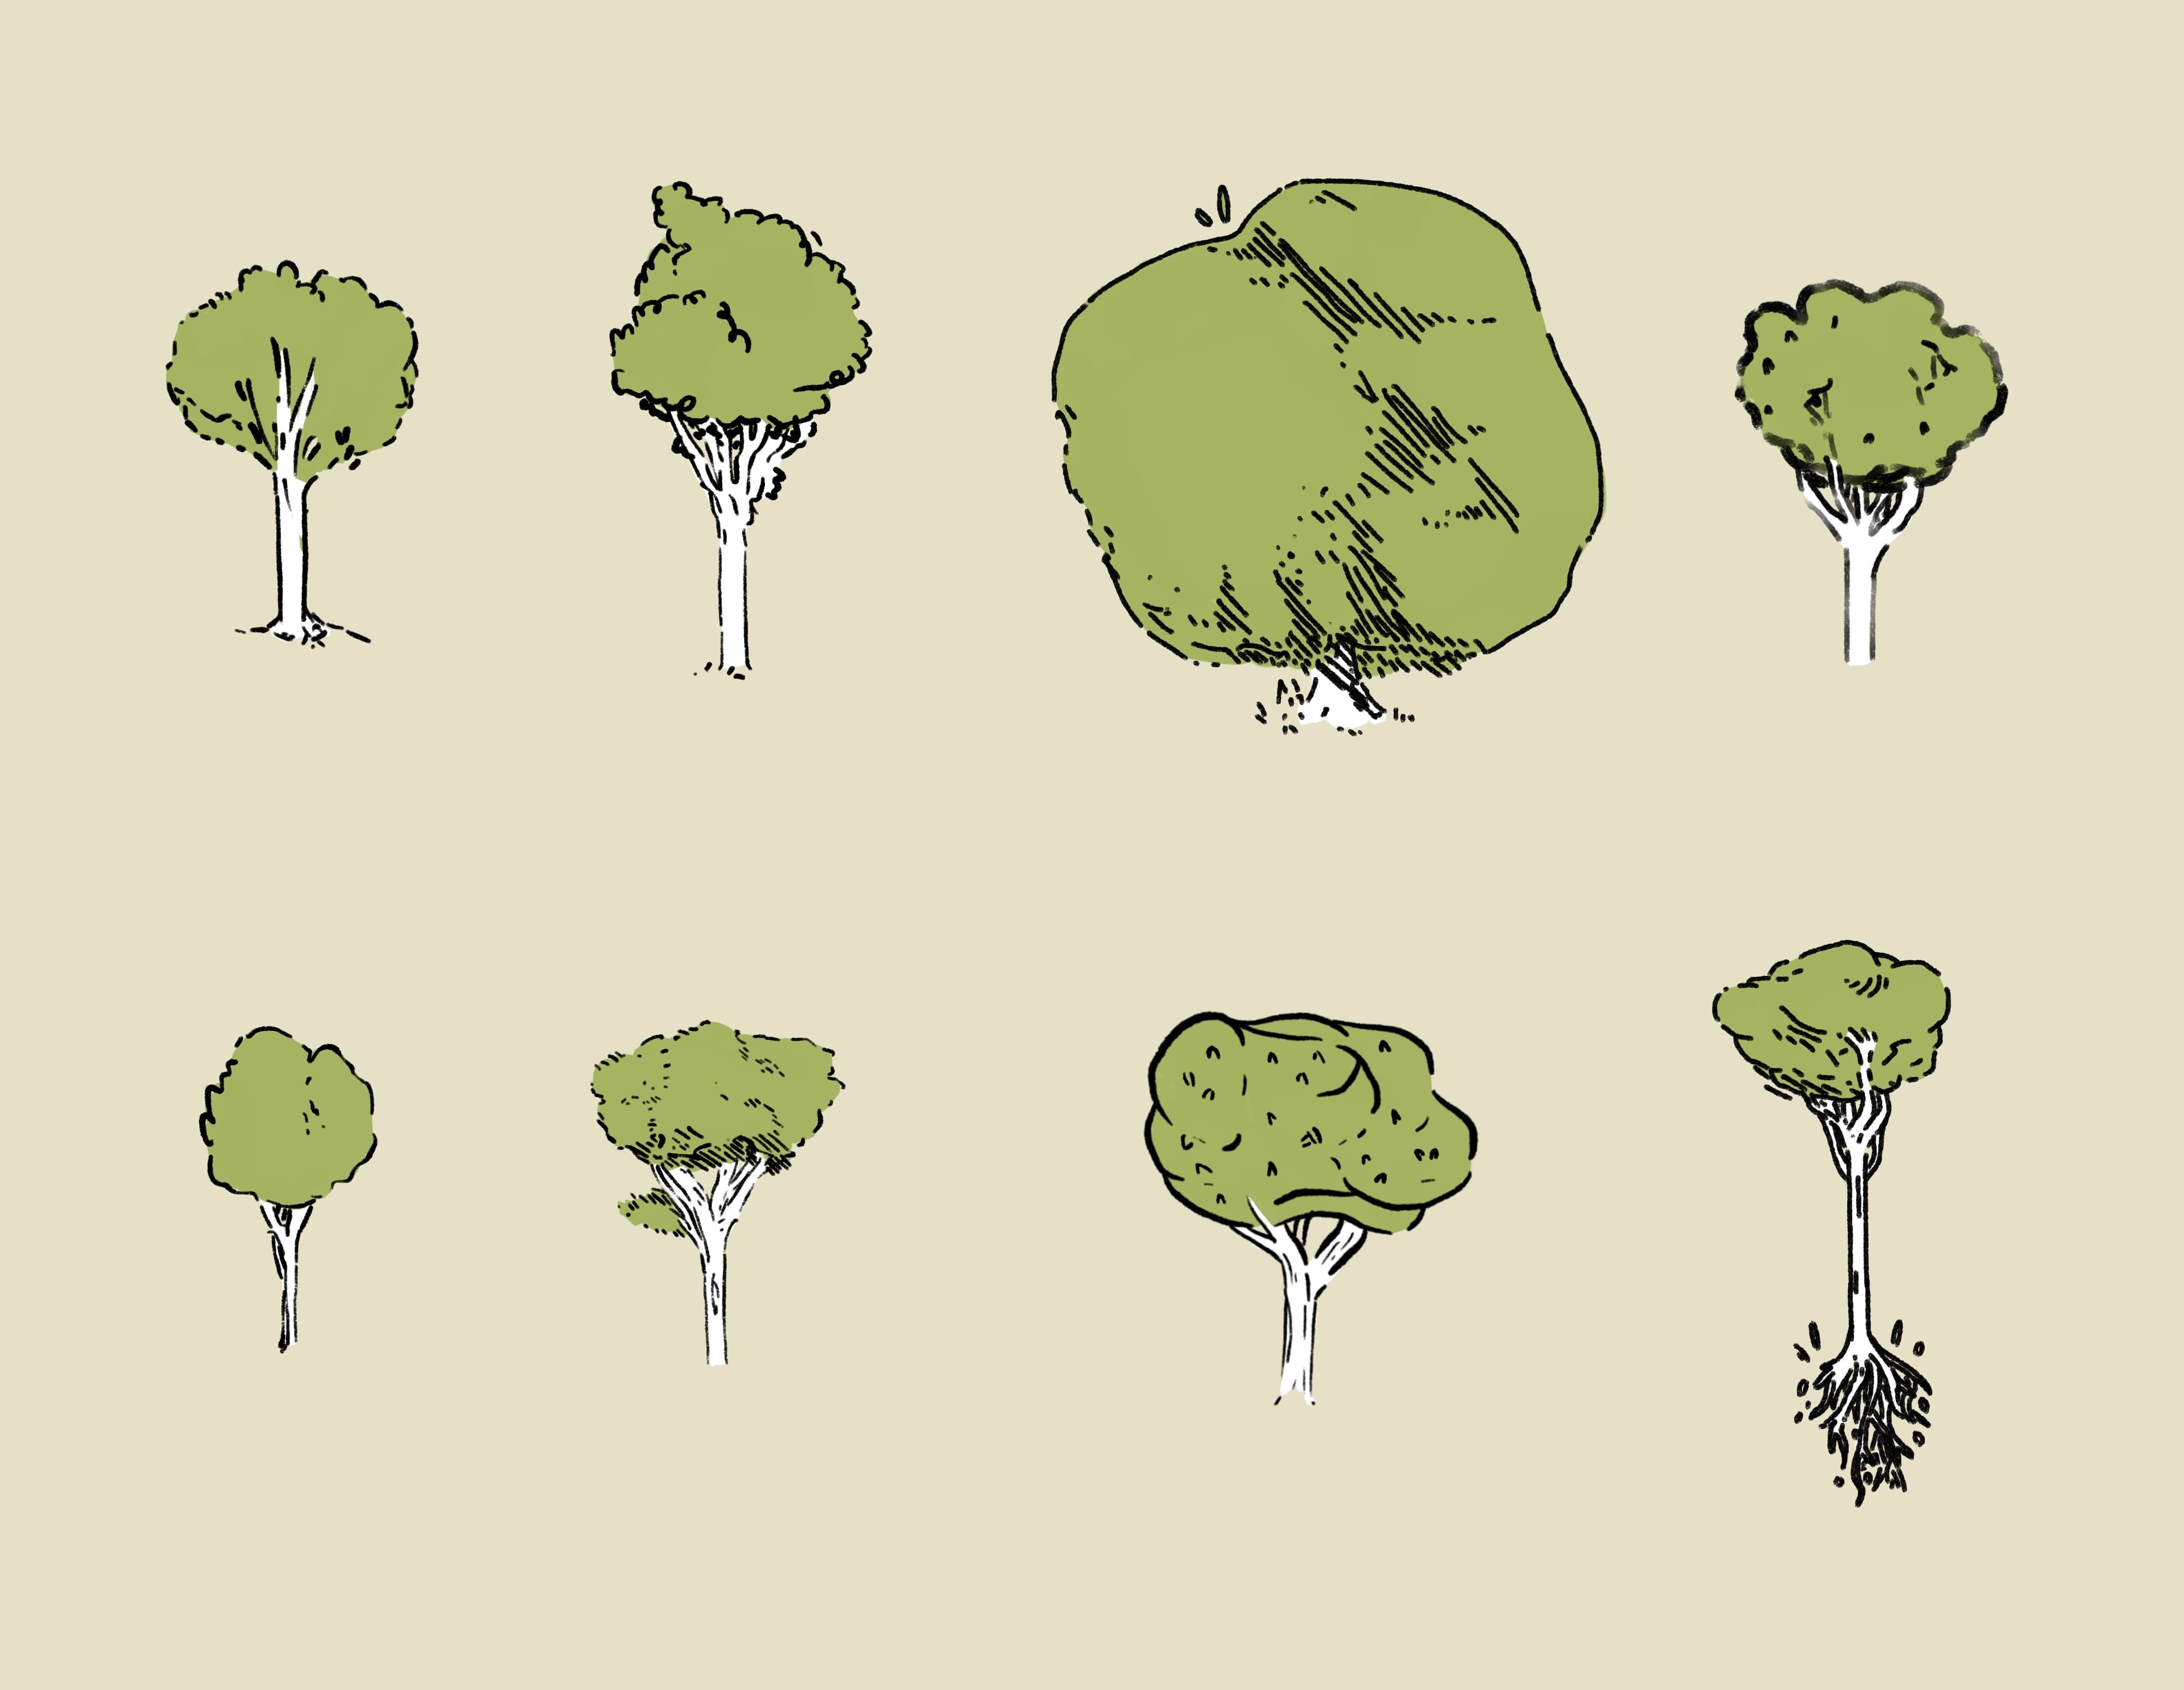 trees in different line styles